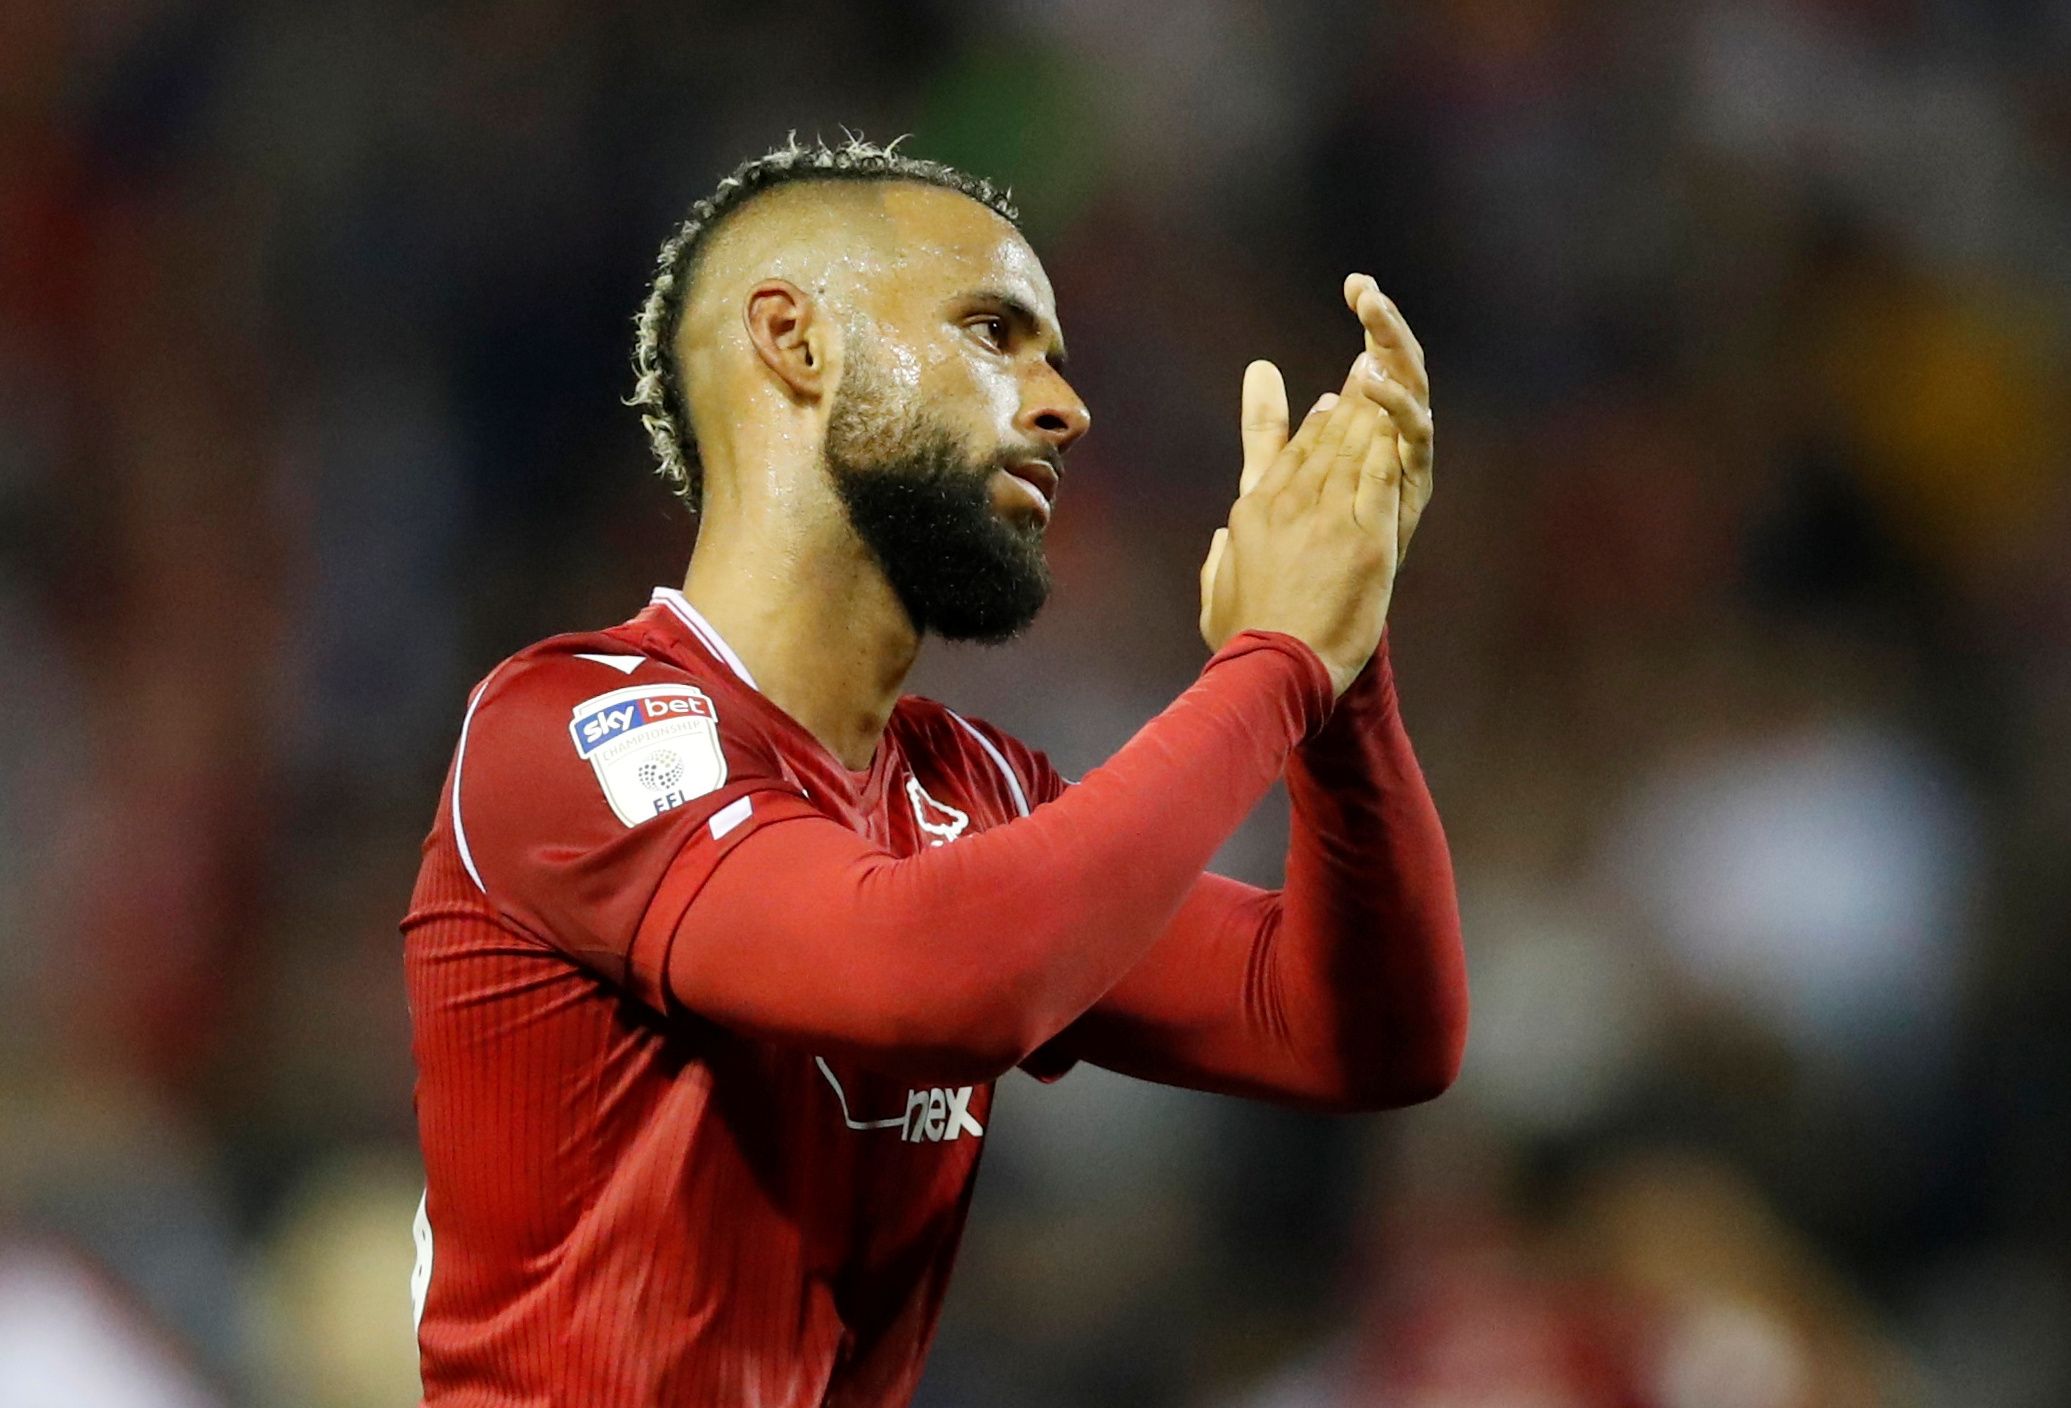 Soccer Football - Carabao Cup Second Round - Nottingham Forest v Derby County - The City Ground, Nottingham, Britain - August 27, 2019  Nottingham Forest's John Bostock applauds fans after the match          Action Images/Andrew Boyers  EDITORIAL USE ONLY. No use with unauthorized audio, video, data, fixture lists, club/league logos or 